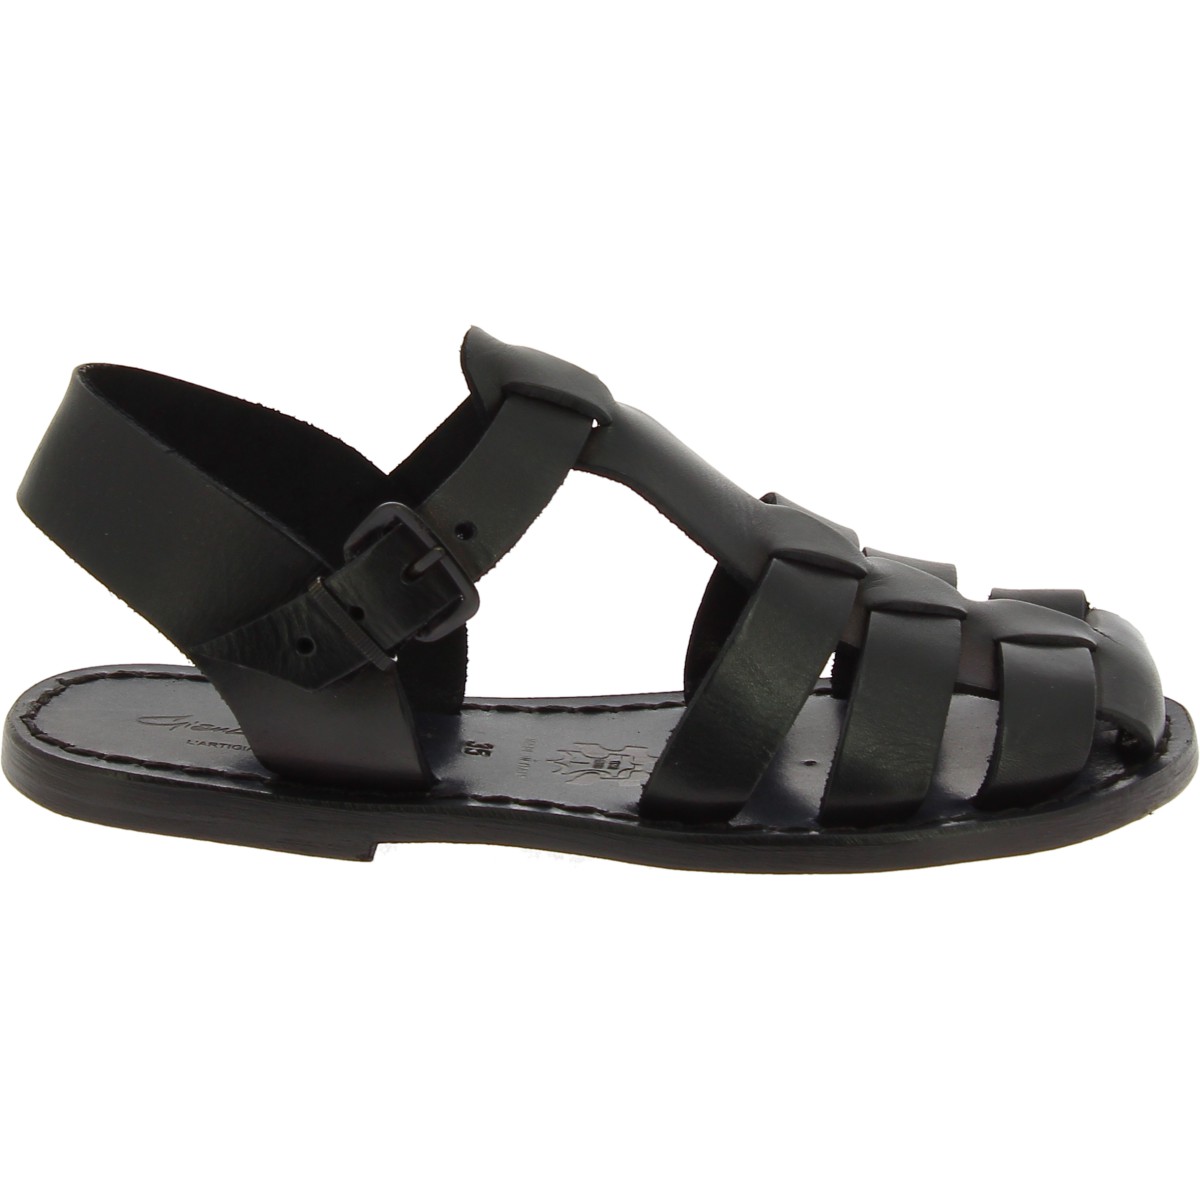 Black flat sandals for women real leather Handmade in Italy | The ...